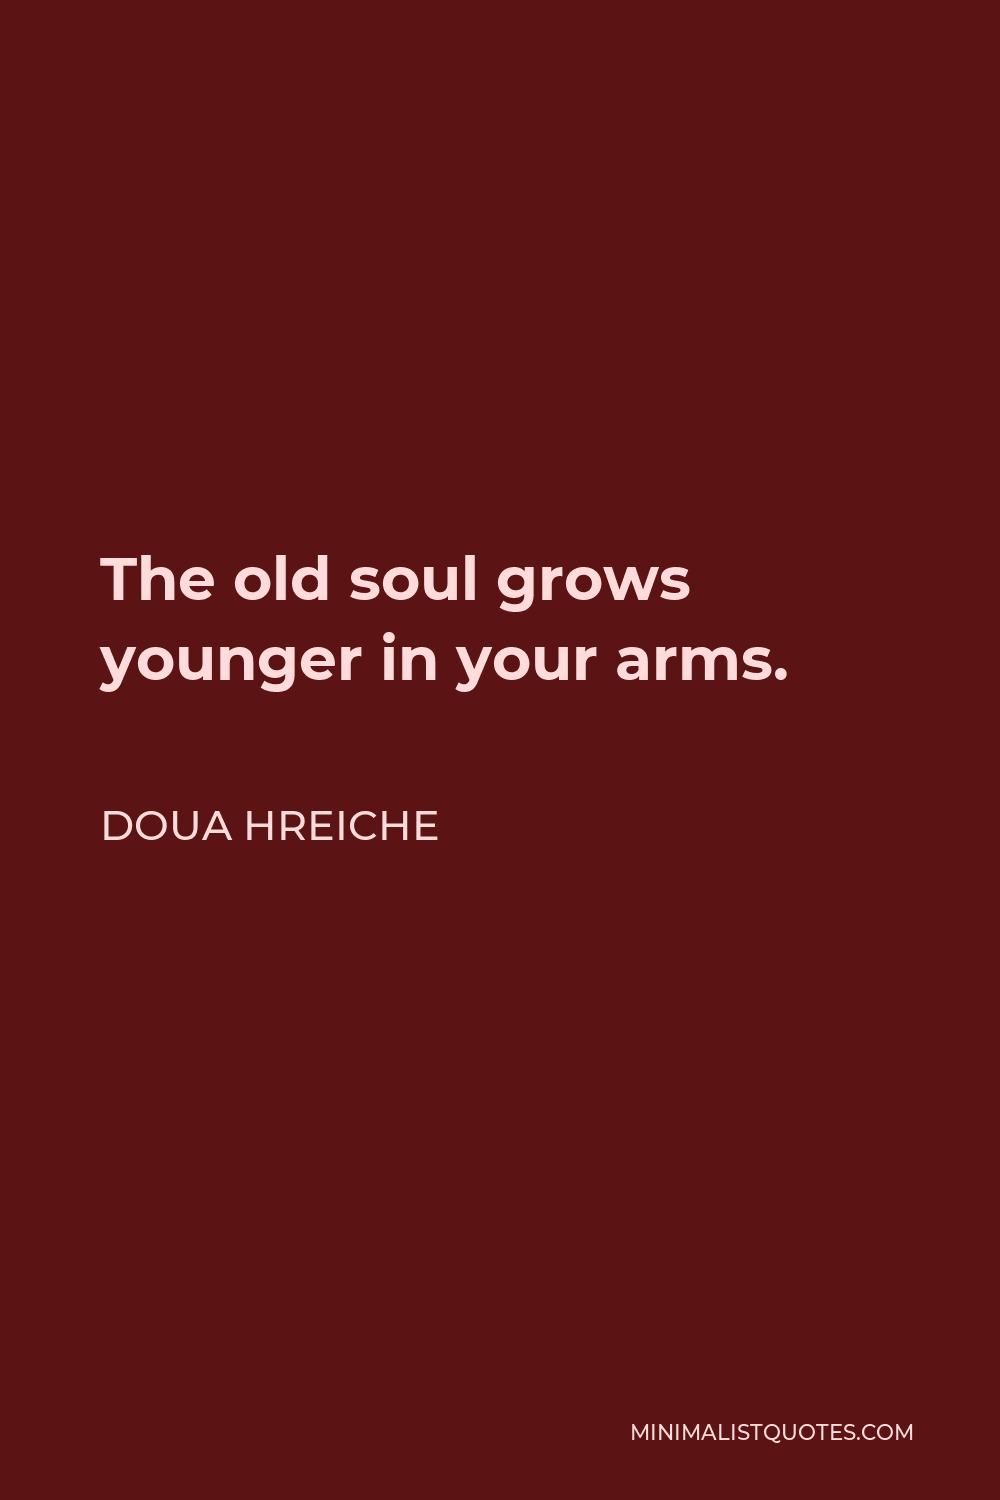 Doua Hreiche Quote - The old soul grows younger in your arms.